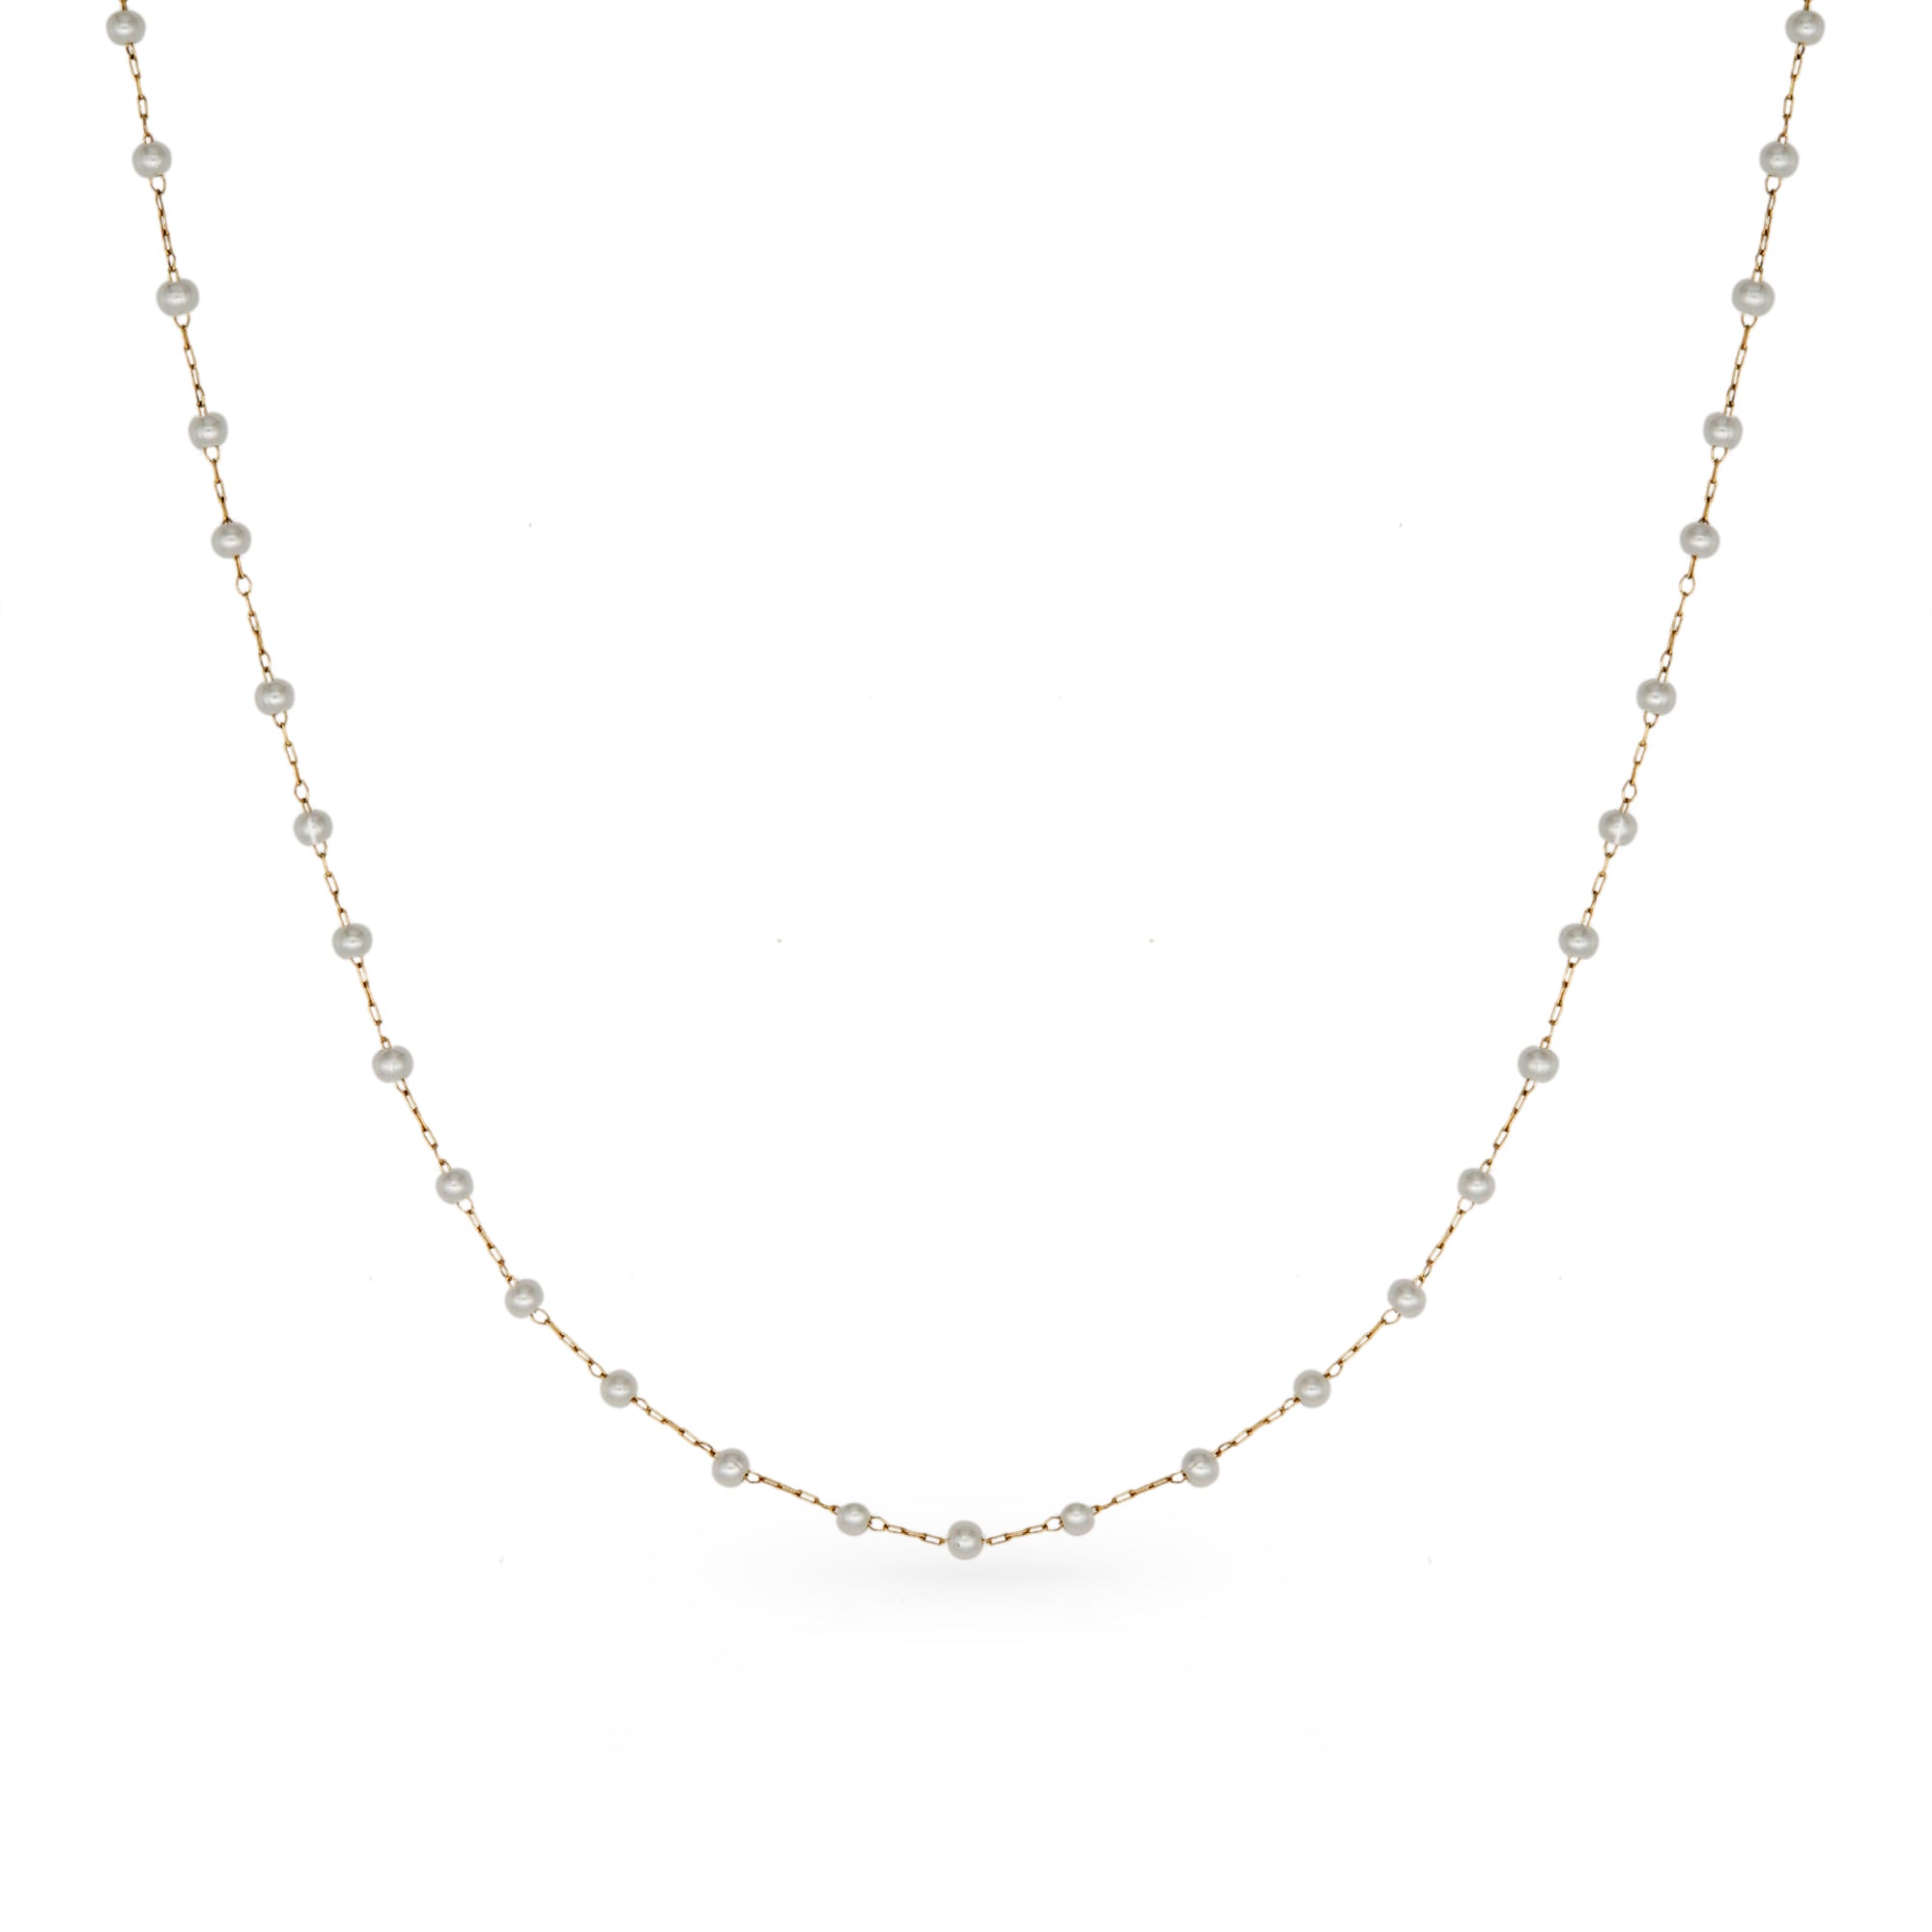 The Dainty Pearl Short GG Necklace